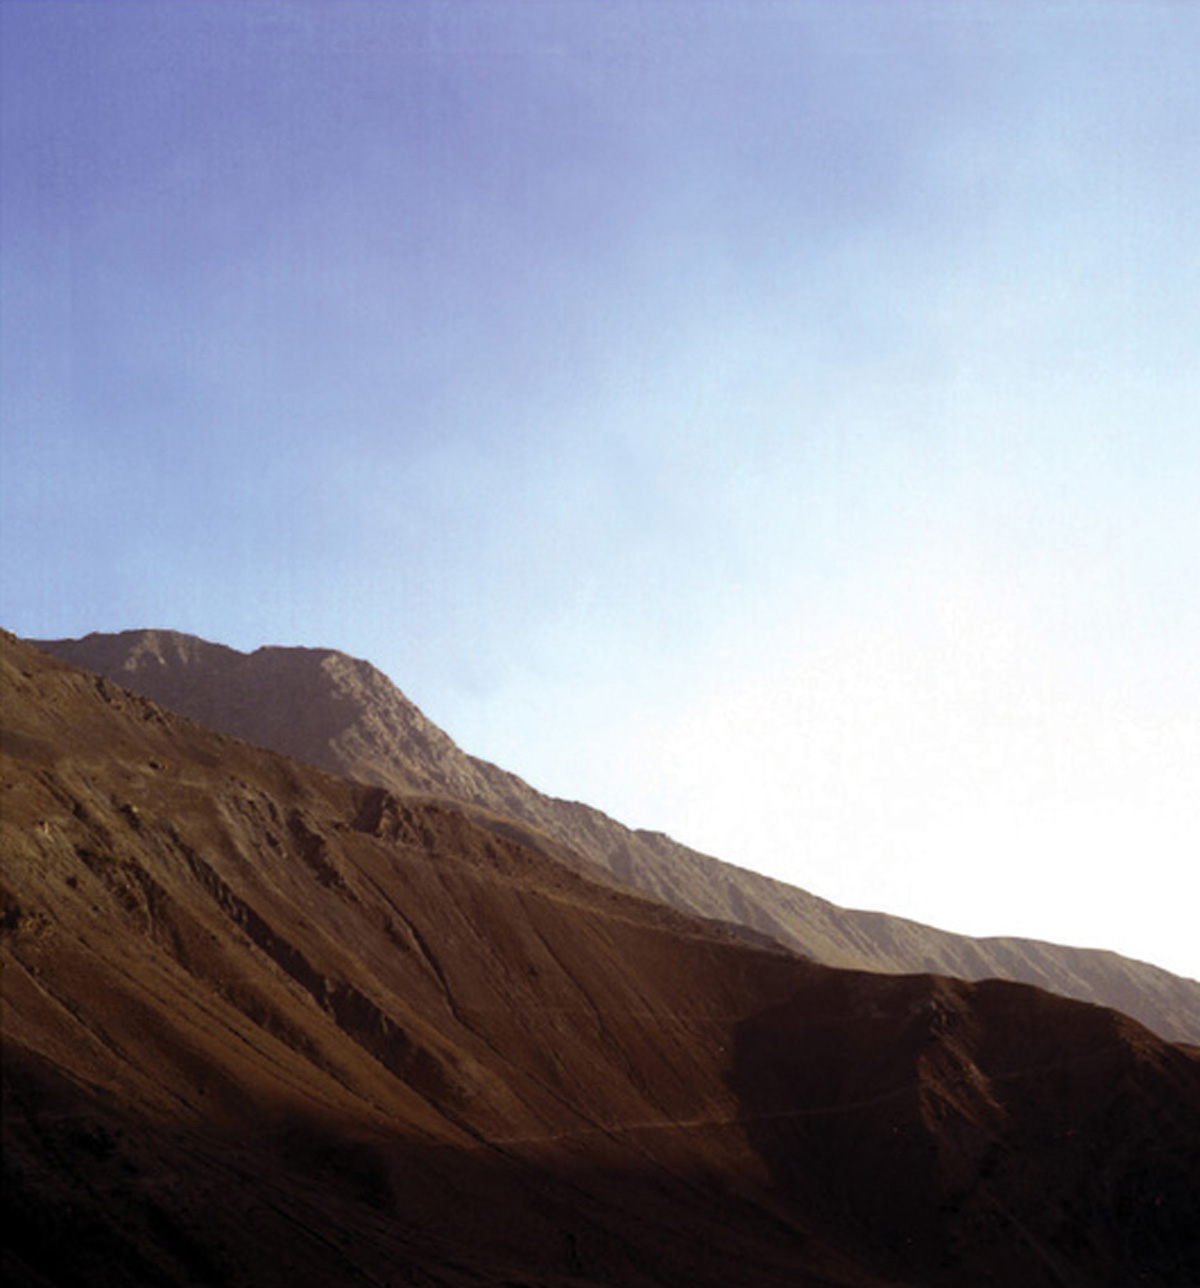 A photograph by artist Marine Hugonnier titled “Mountain with No Name (Pandjshêr Valley, Afghanistan)”, two thousand three.